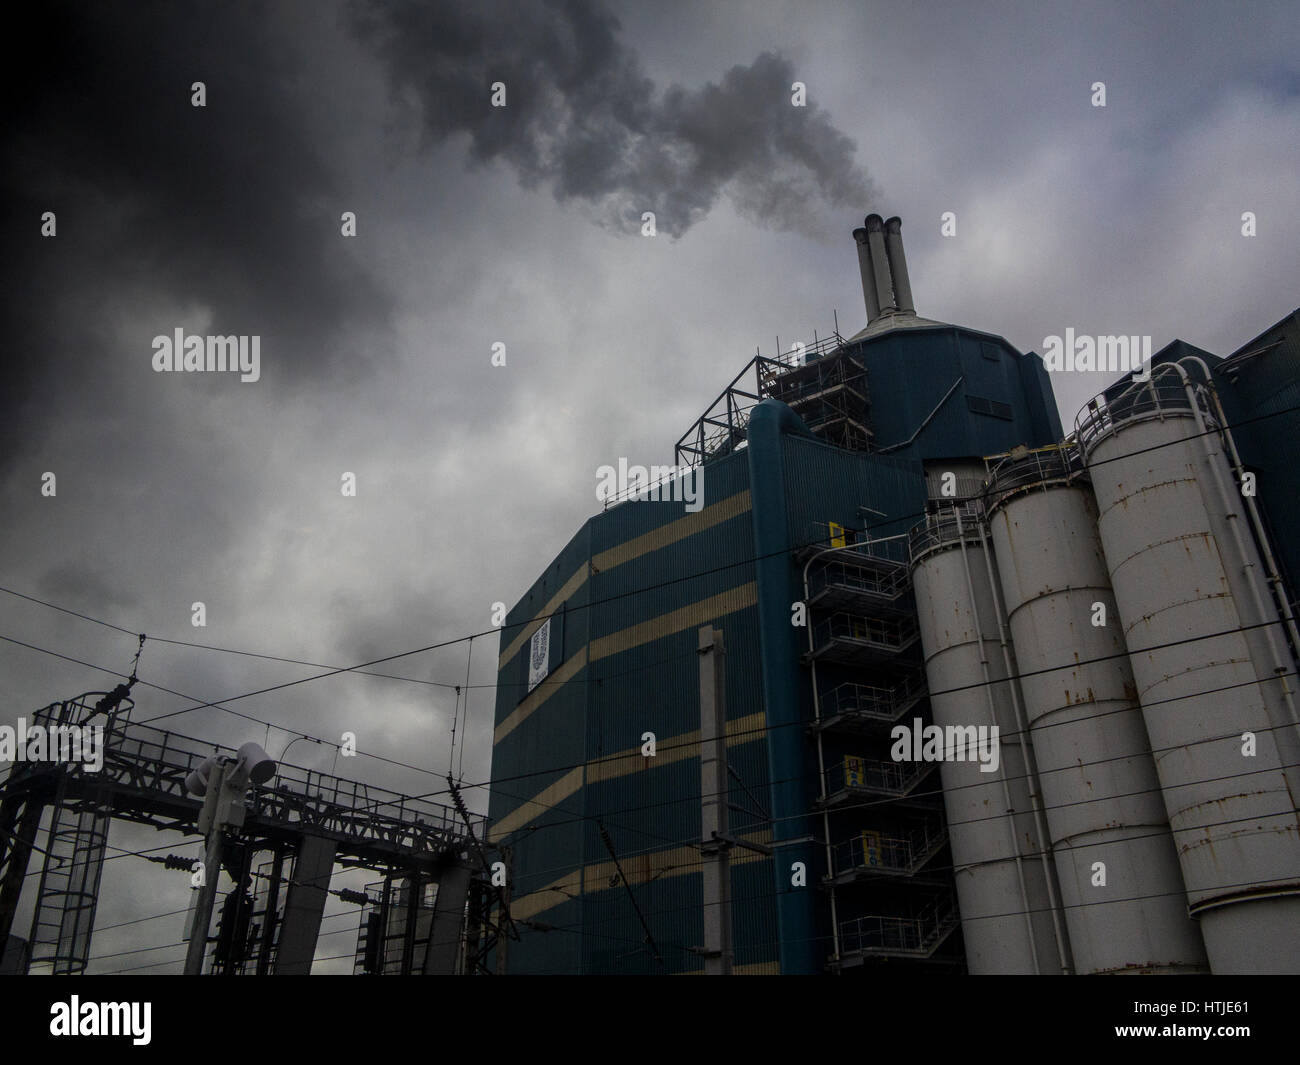 Unilever's detergent plant emits clouds of pollution Stock Photo